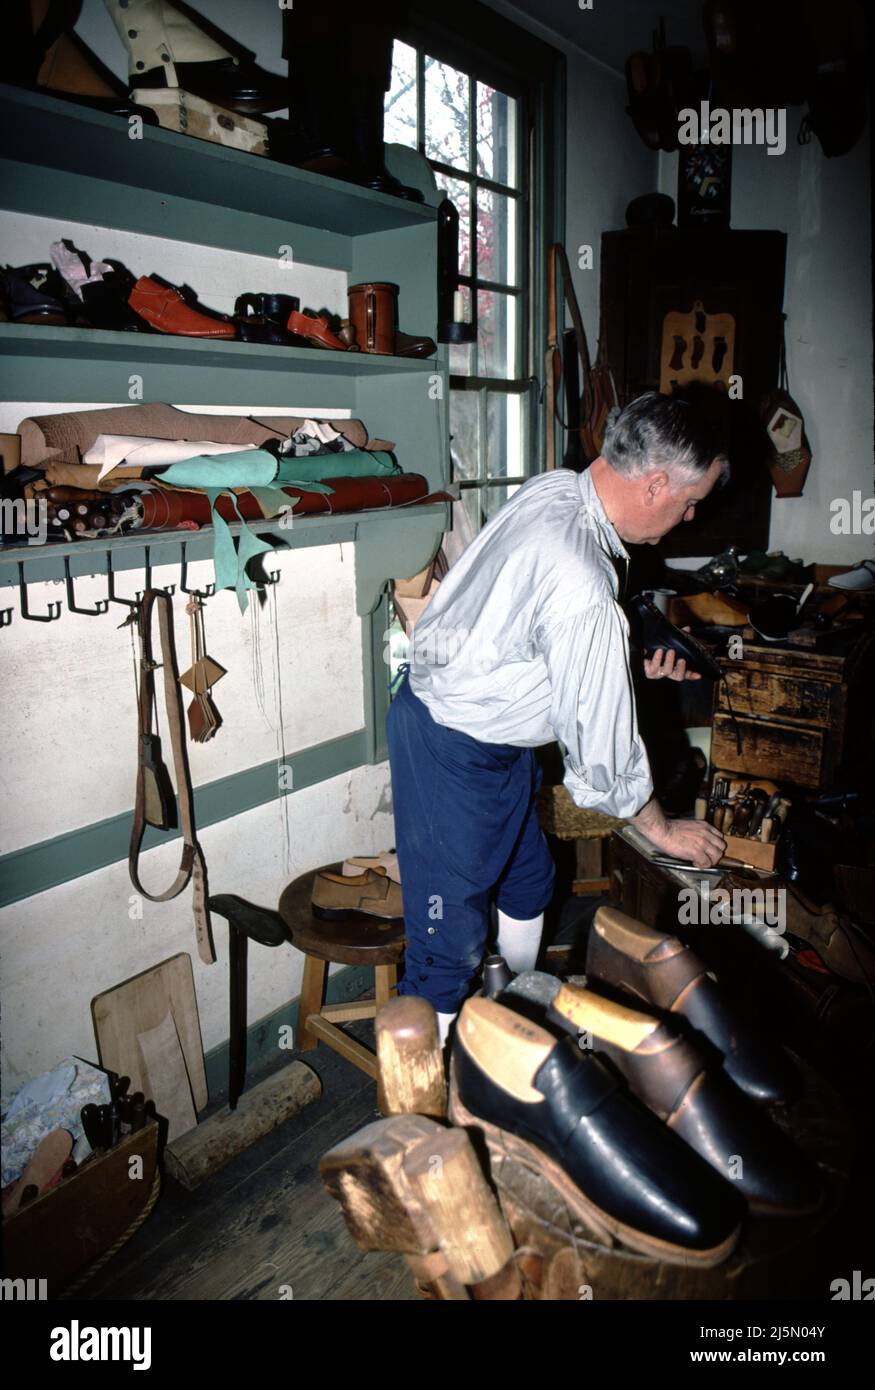 Williamsburg, CA. U.S.A. 9/1987. Cordwainer was the title given to shoemakers.  Cobblers were those who repaired shoes.  The cobbler had as much as five years less training than a cordwainer.  The American colonies, cobblers were prohibited by proclamation from making shoes.  The first shoemakers, tanners and other tradesmen arrived in Jamestown in 1607. among the colony’s principal founder John Smith’s many talents, was that of shoemaker –  the settlement was partially funded by a thriving English shoe trade. Stock Photo